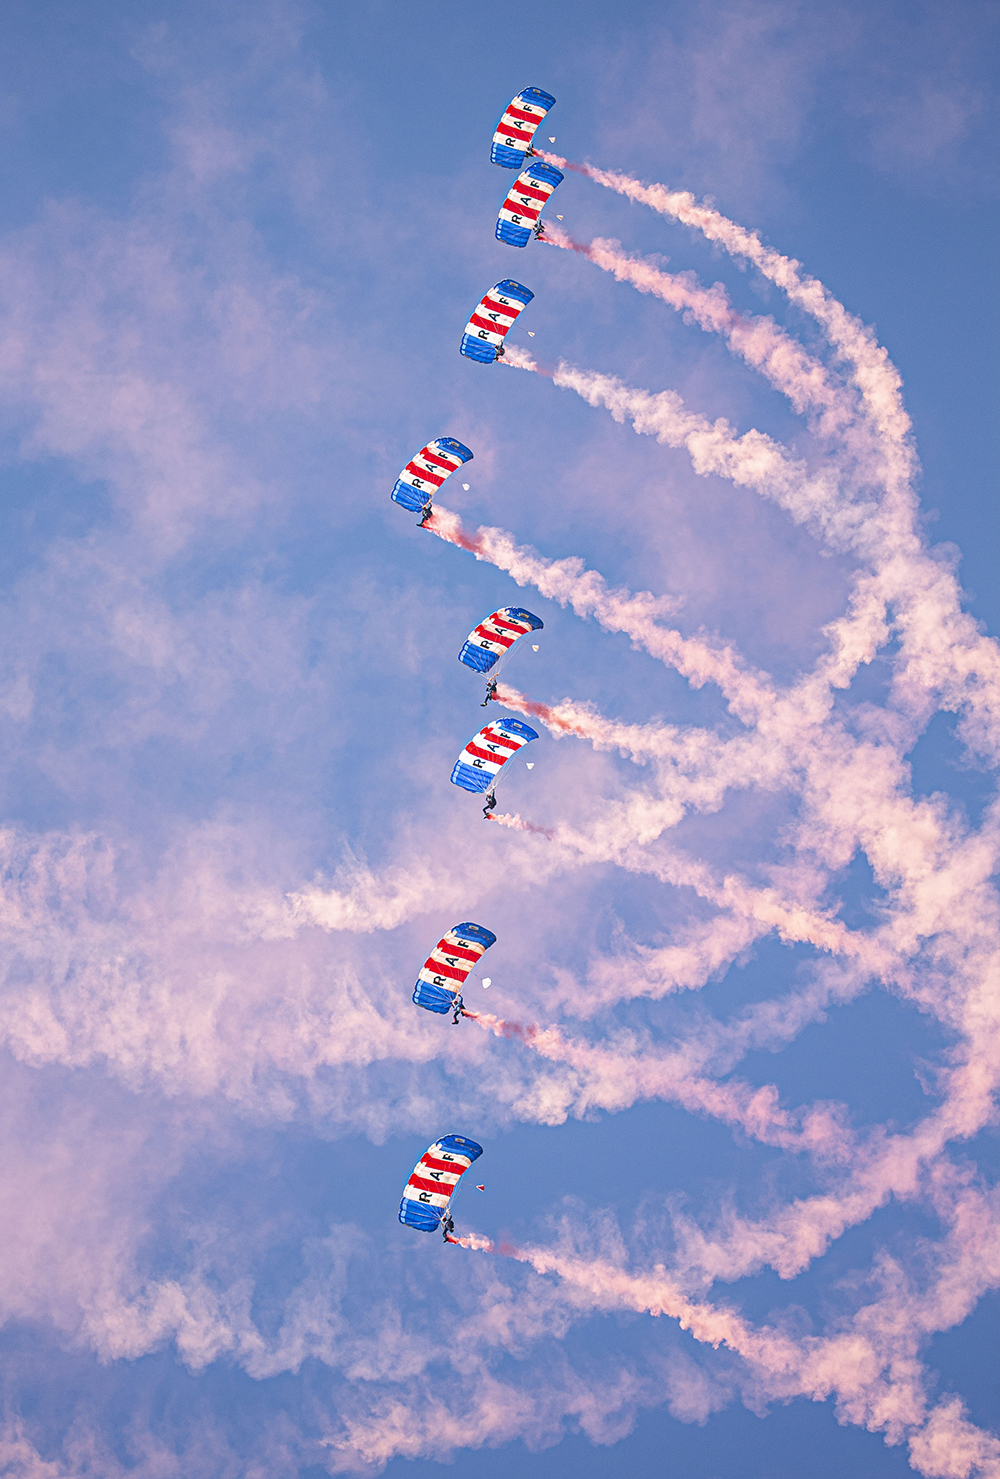 The RAF Falcons’ famous non-contact canopy stack